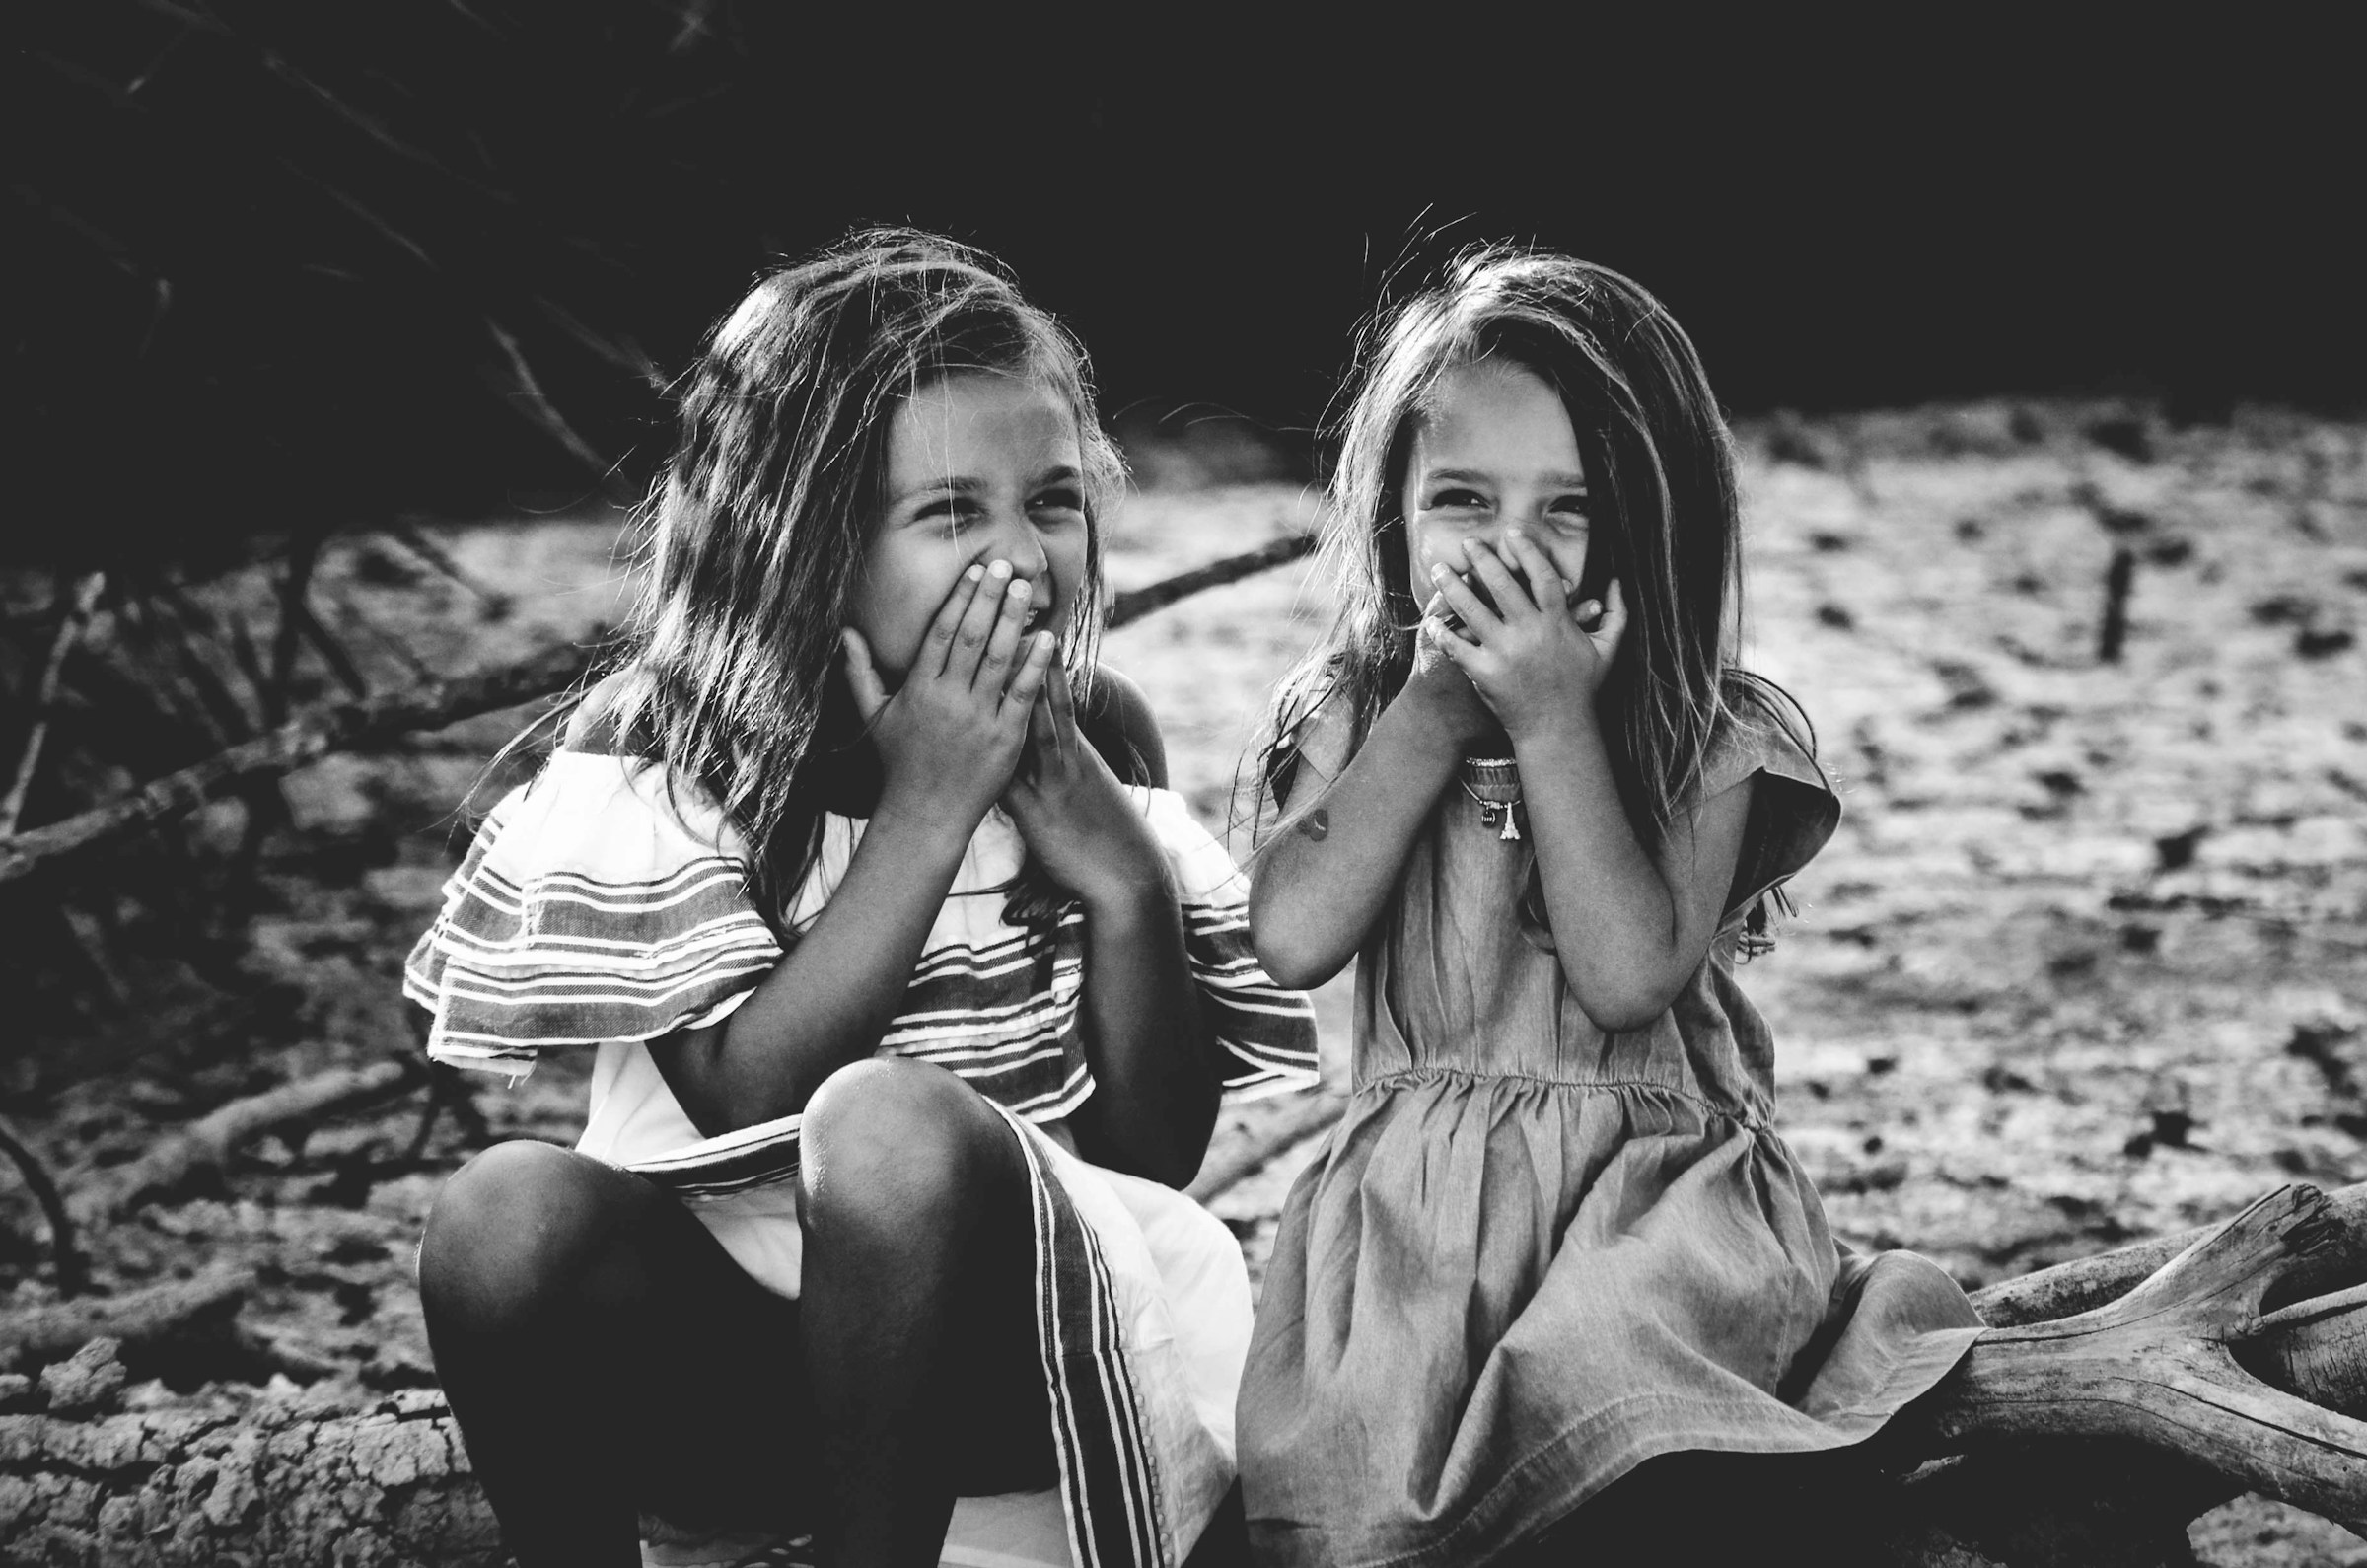 Two young girls | Source: Unsplash